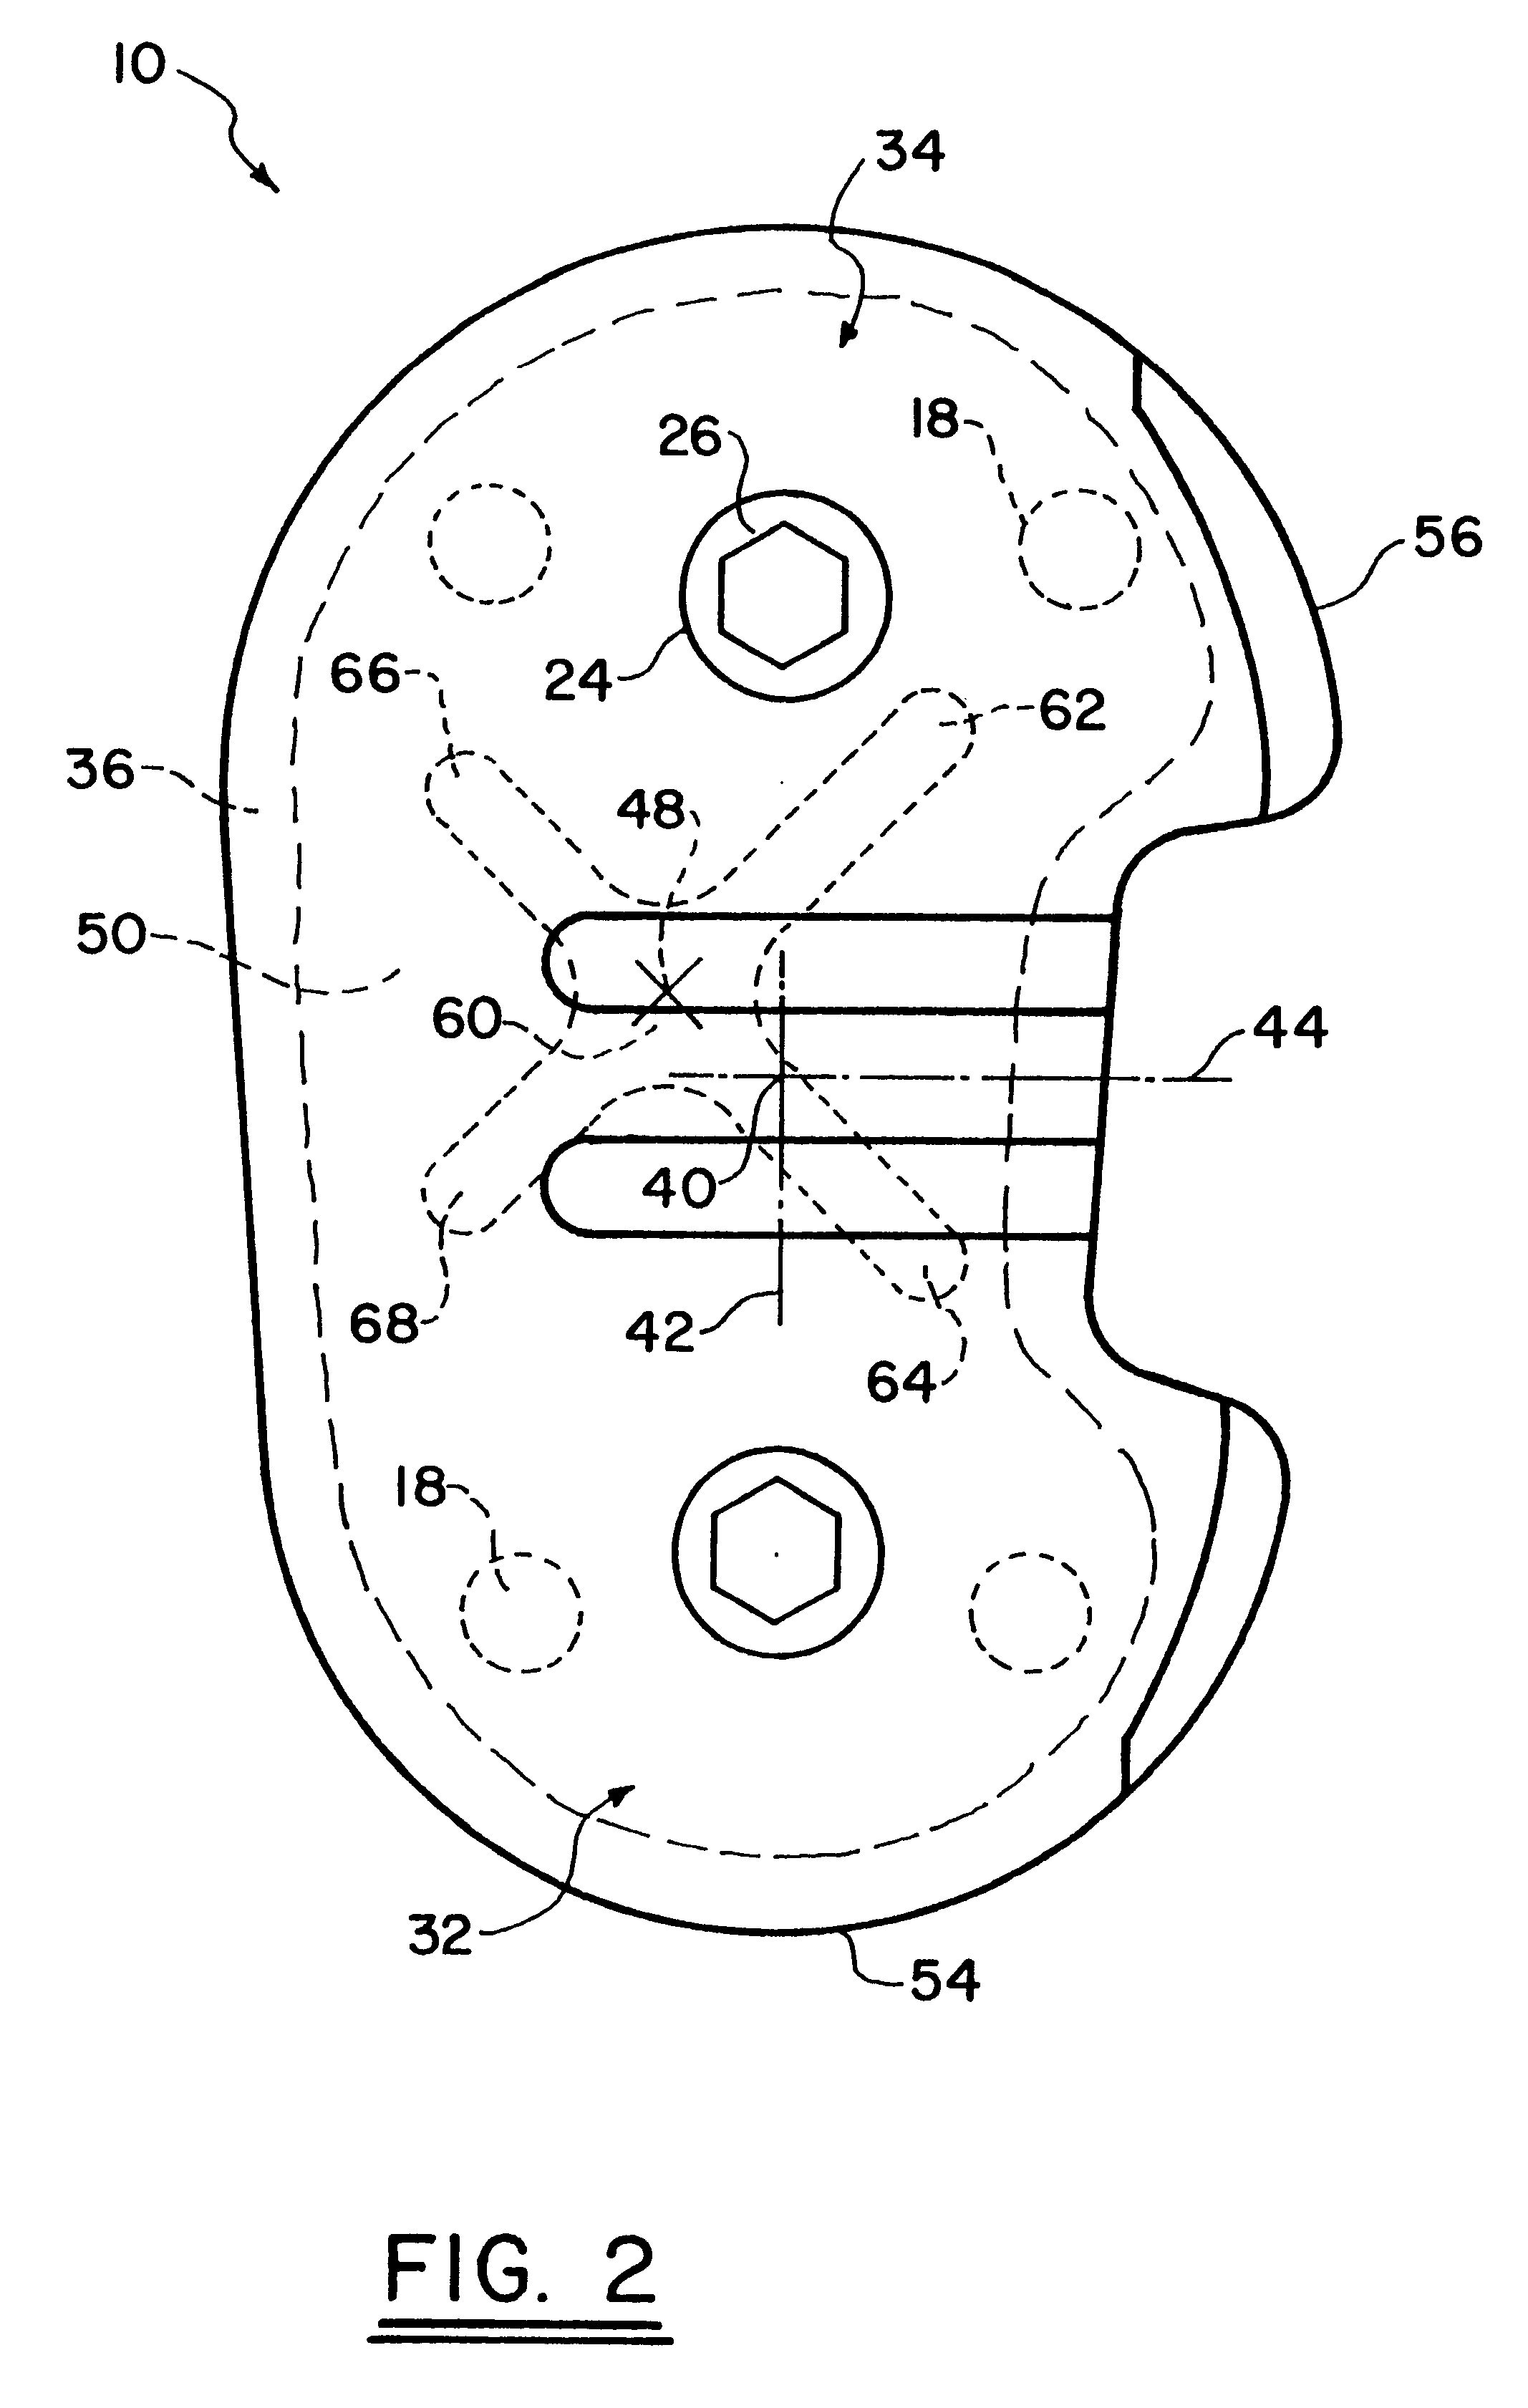 Tibial prosthetic implant with offset stem